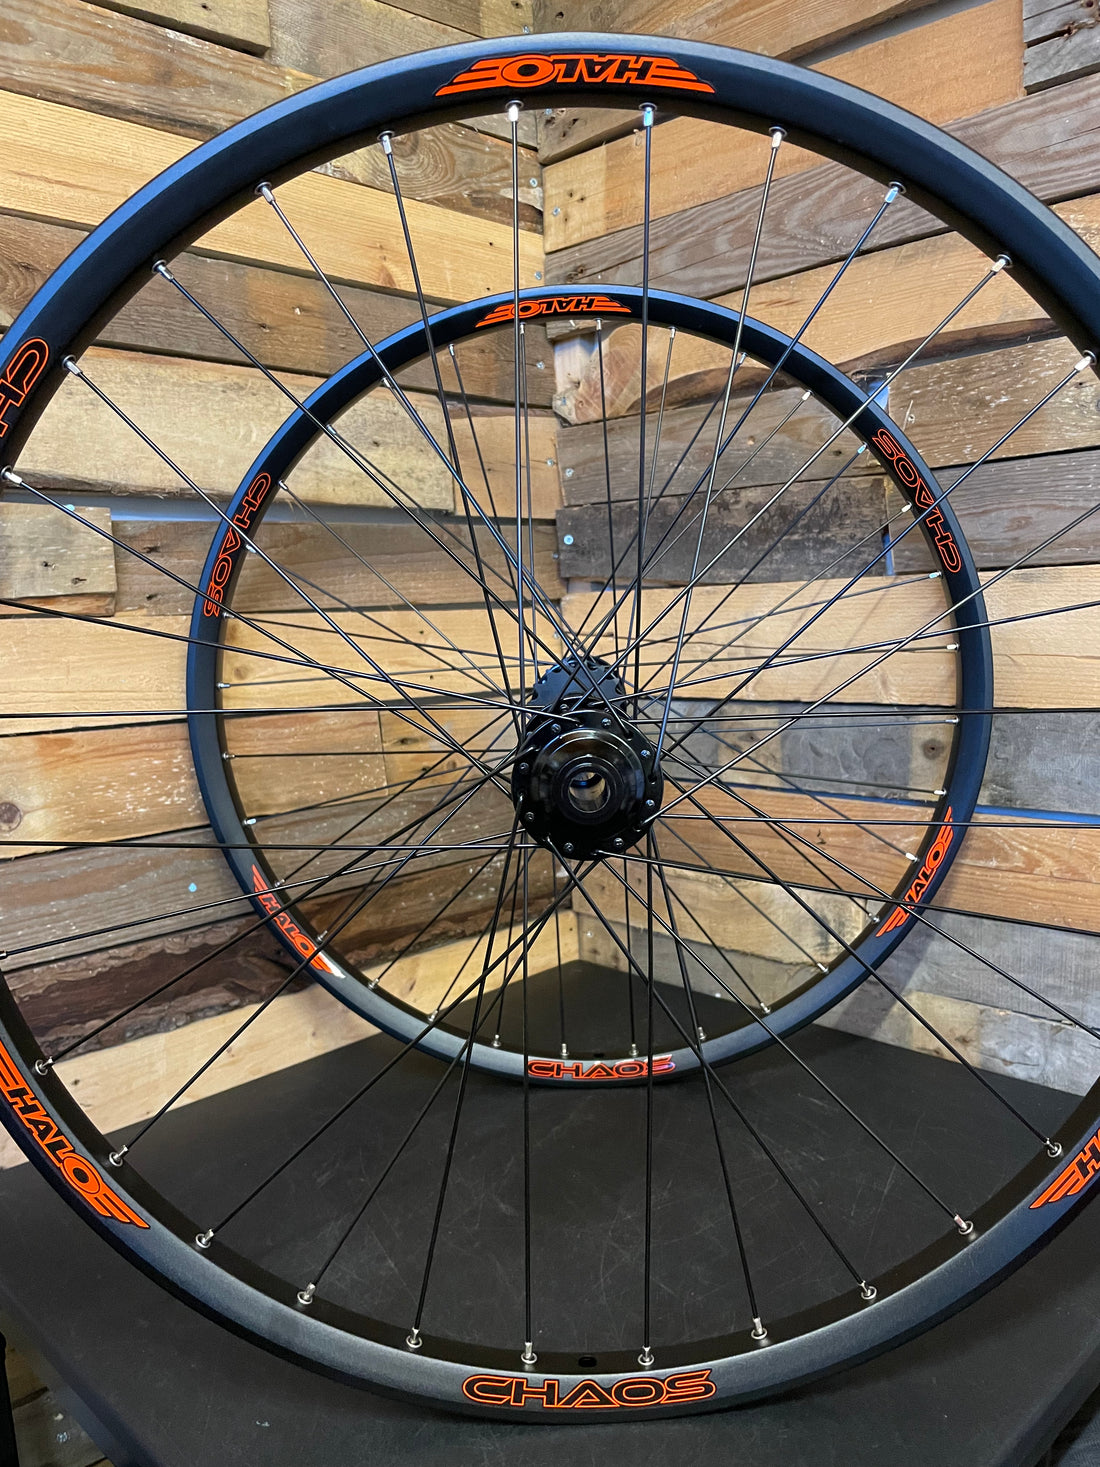 Halo Chaos Wheels with Orange Decals